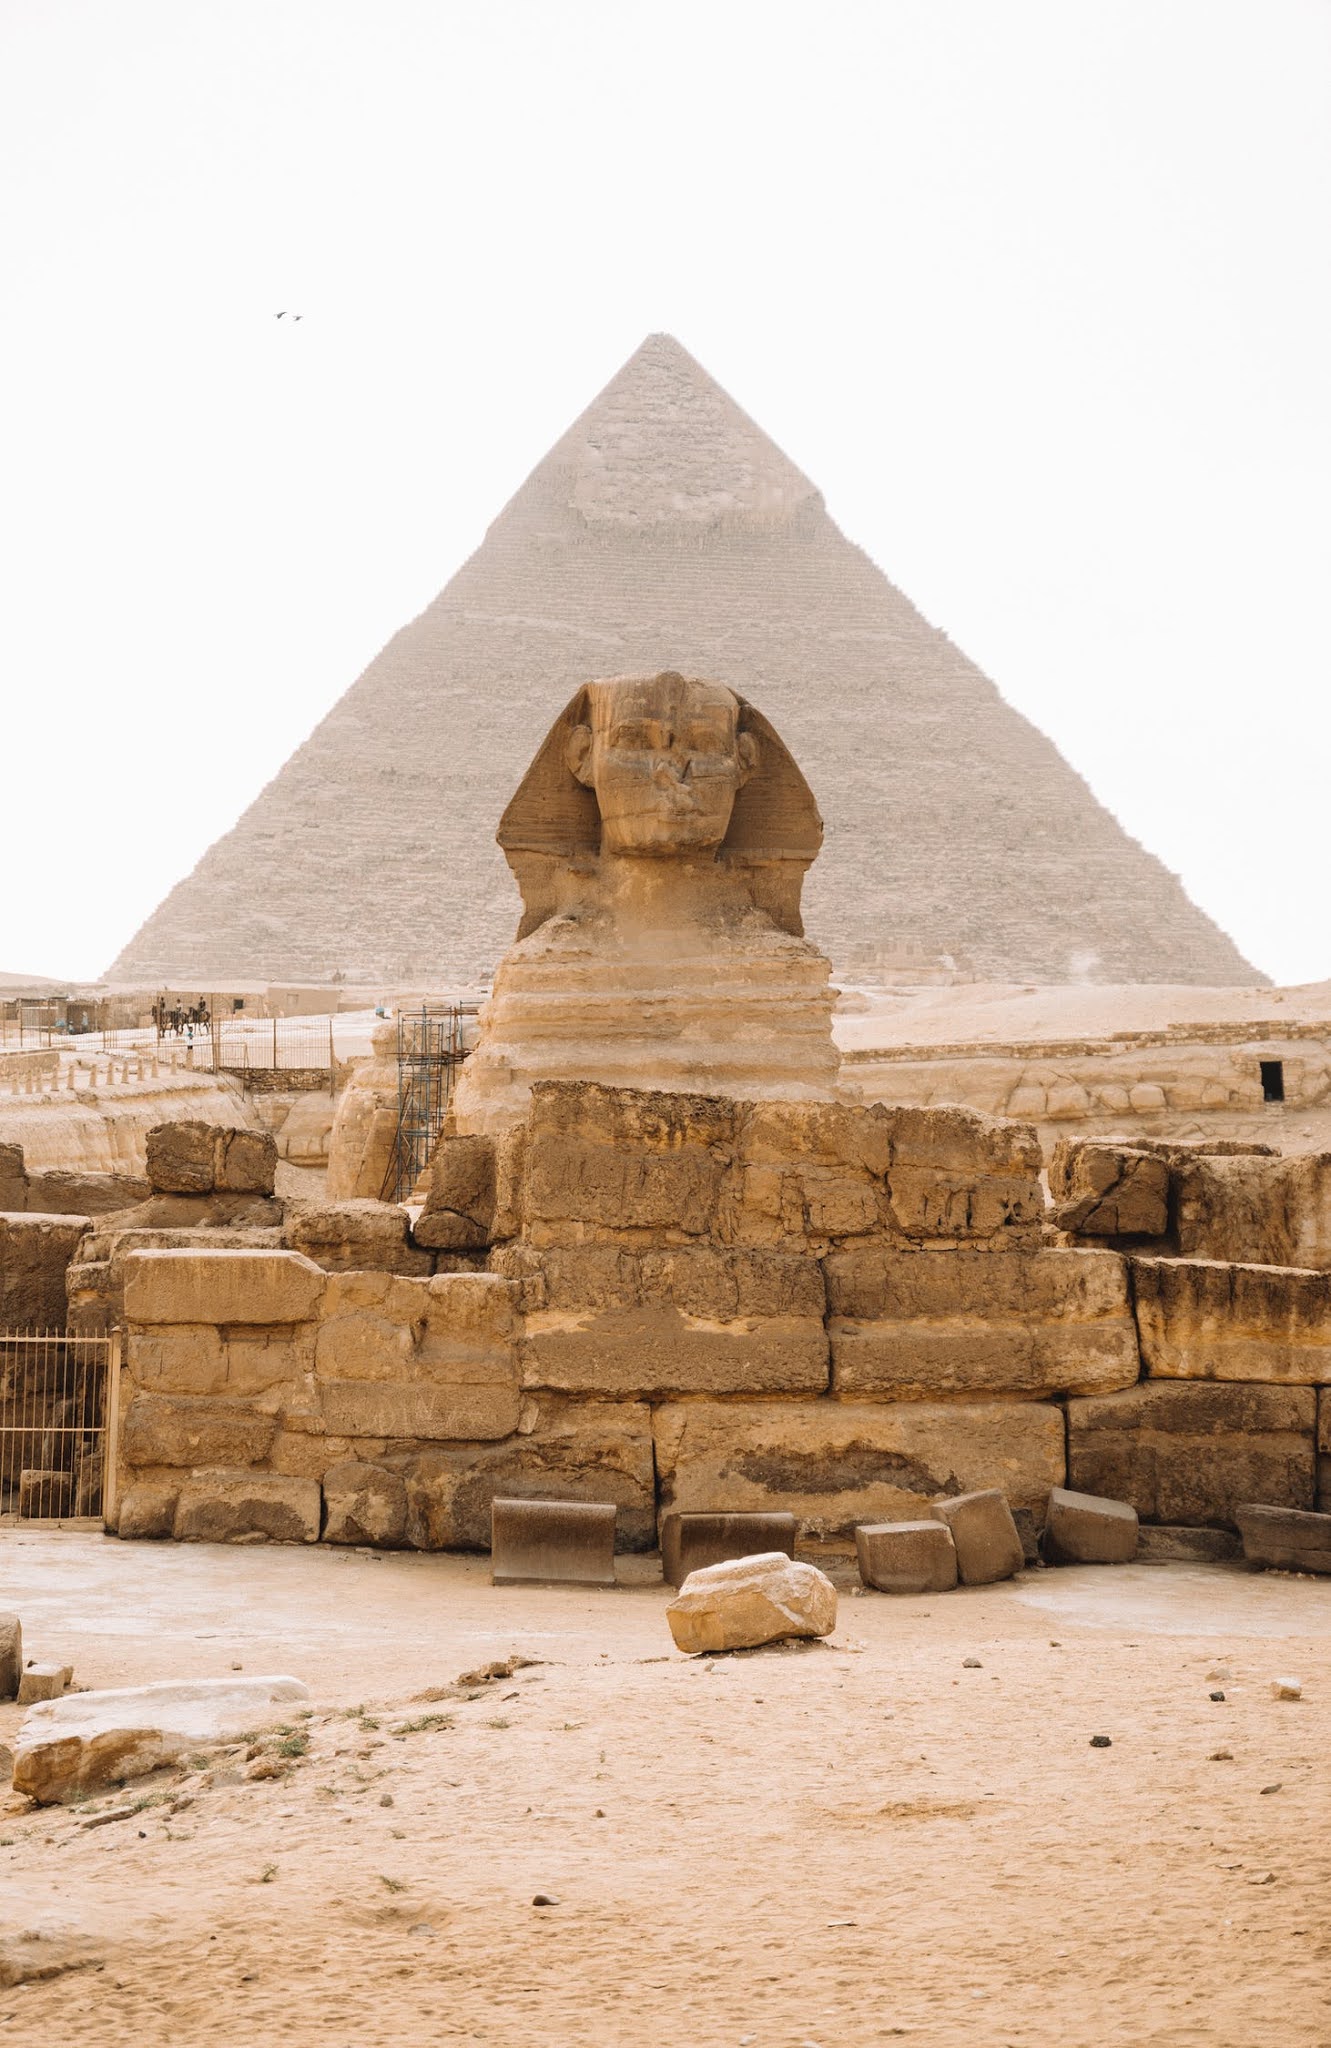 Architecture and the amazing sculptures of Ancient Egyptian civilization. The great Sphinx of Giza